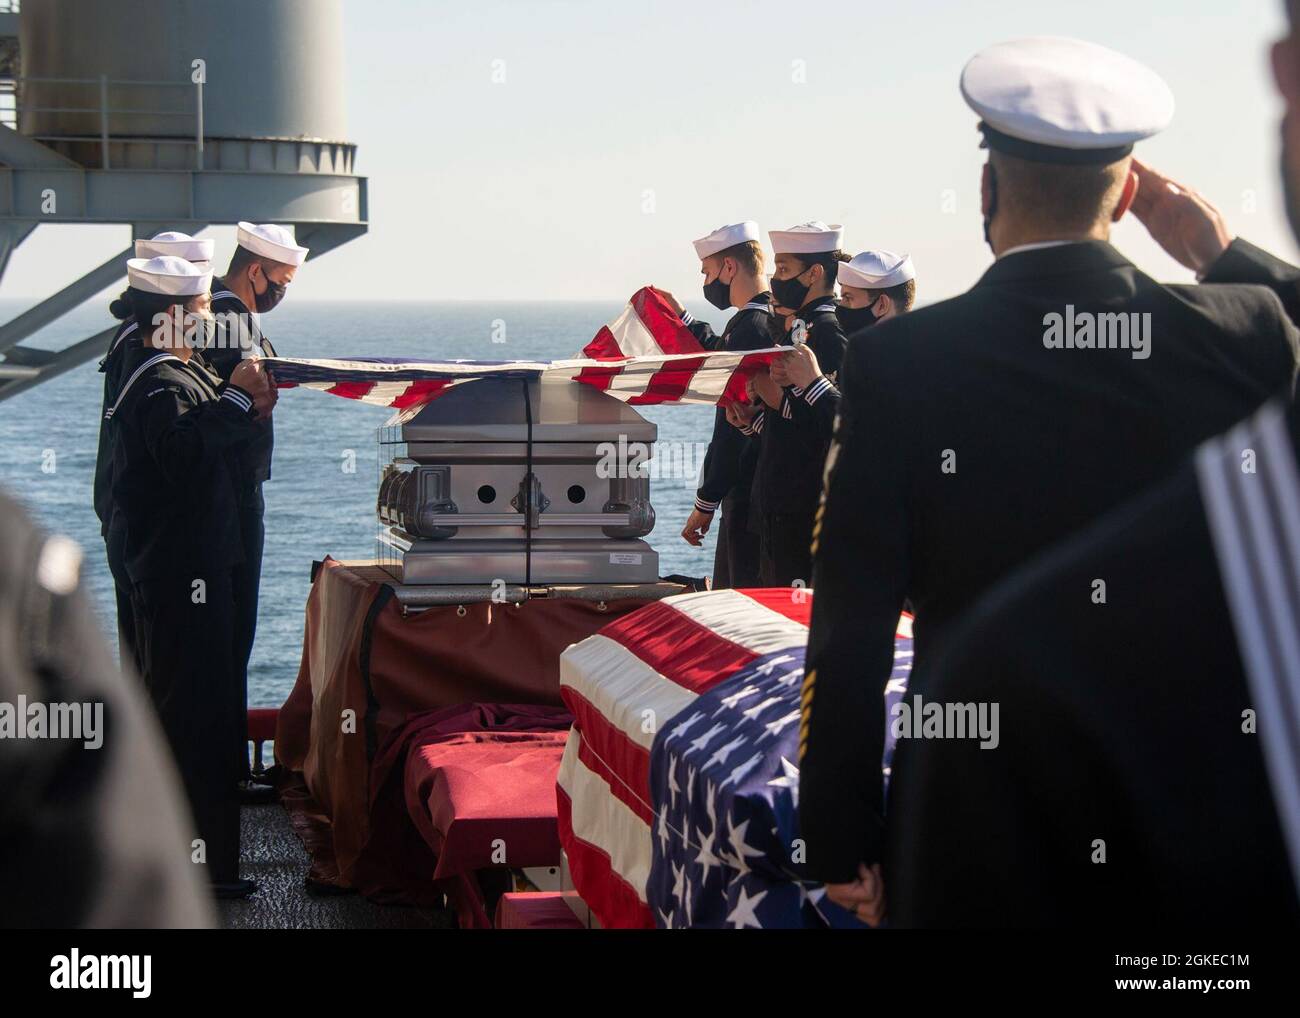 PACIFIC OCEAN (March 29, 2021) Sailors fold the national ensign during a burial at sea ceremony aboard Wasp-class amphibious assault ship USS Essex (LHD 2). Essex is underway conducting routine operations in U.S. Third Fleet. Stock Photo